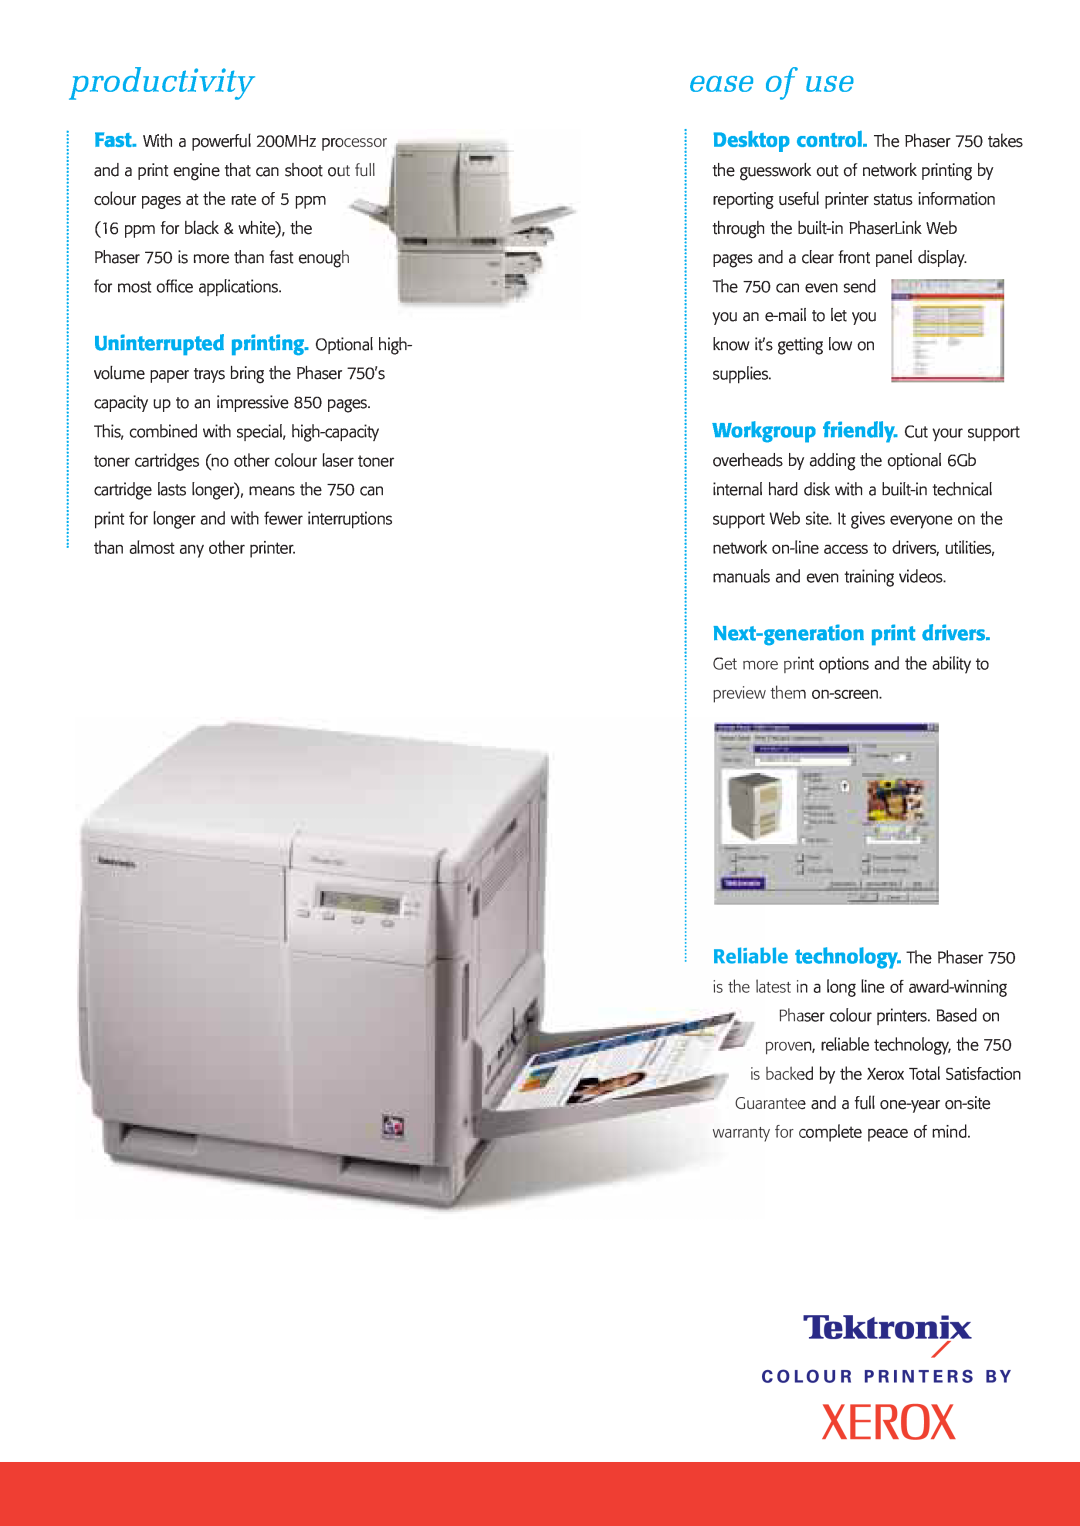 Xerox 750P specifications productivity, ease of use, Next-generationprint drivers 